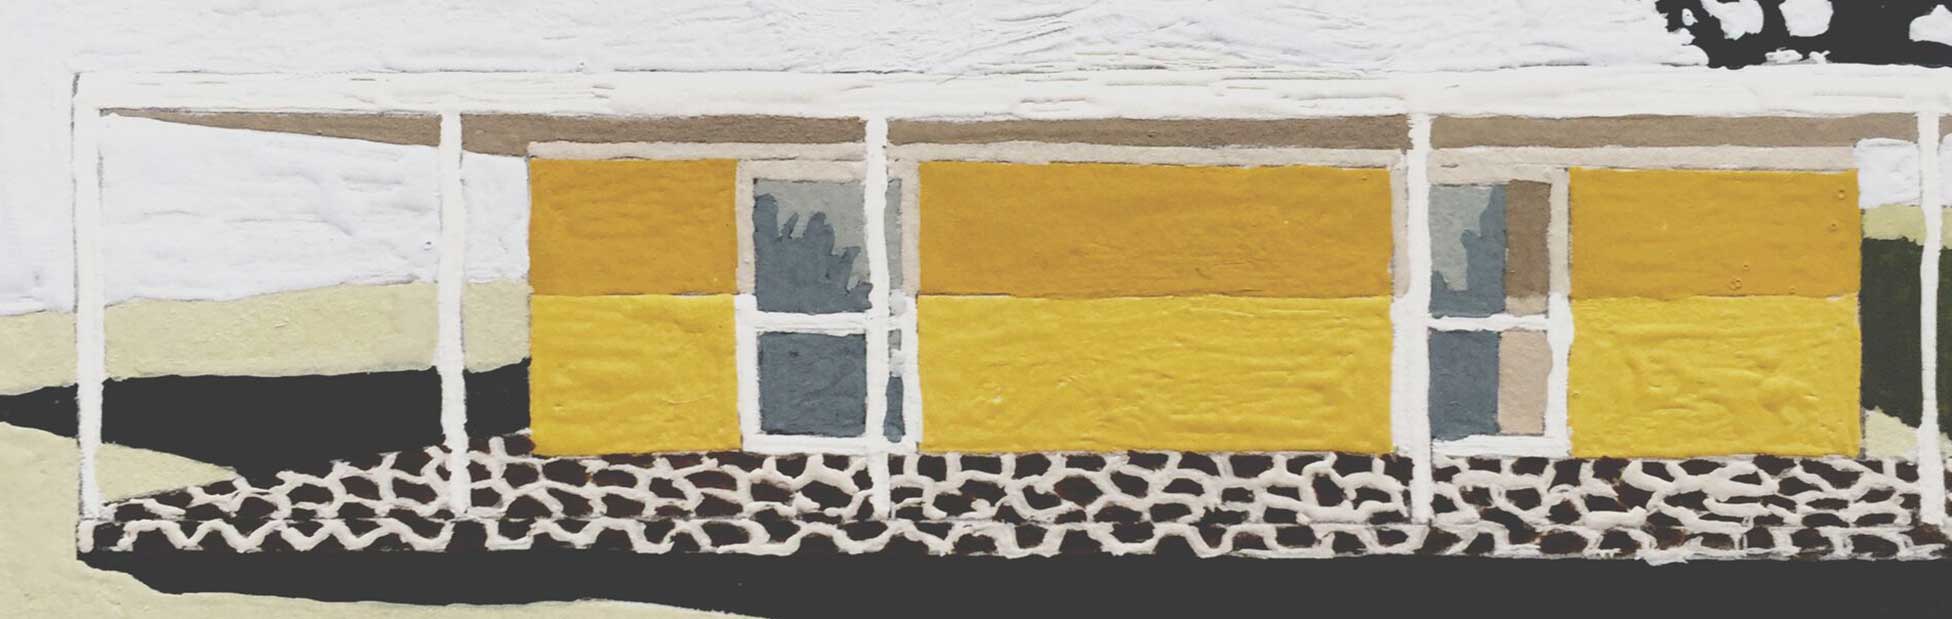 Artwork of yellow house with white roof